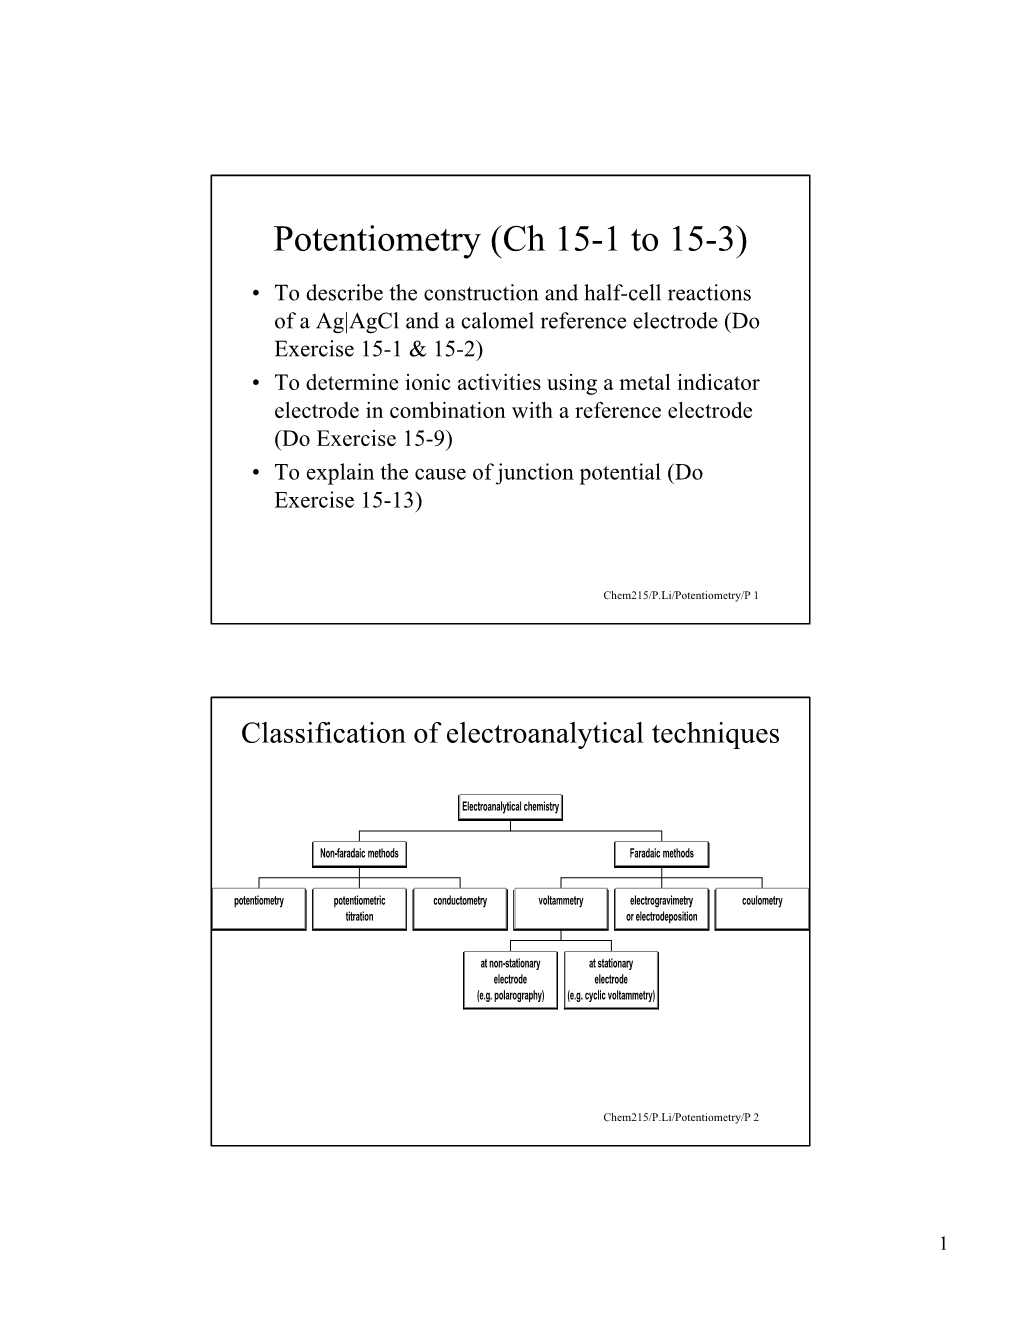 Potentiometry (Ch 15-1 to 15-3)